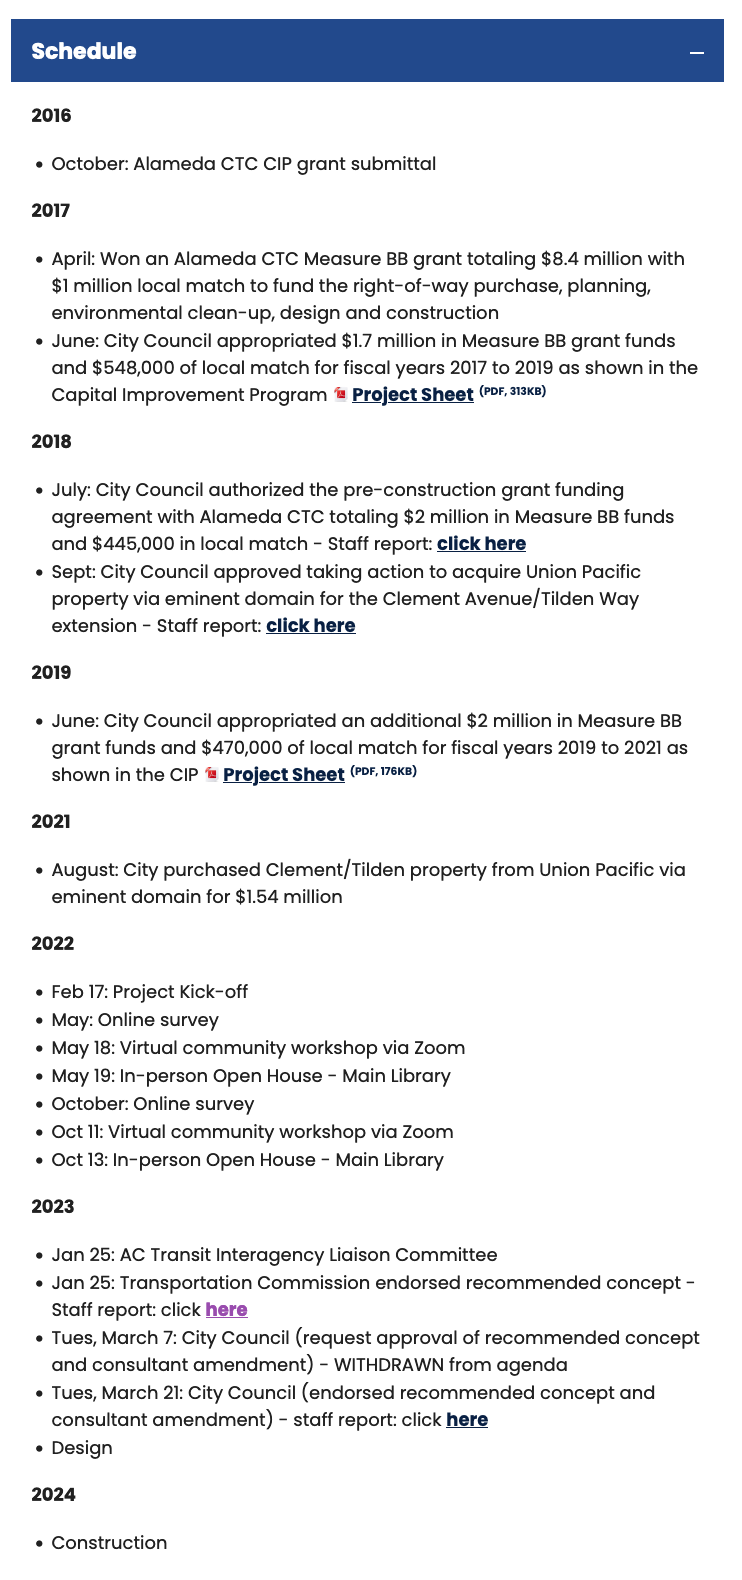 schedule from 2016 to 2024 for the Clement Ave/Tilden Way project